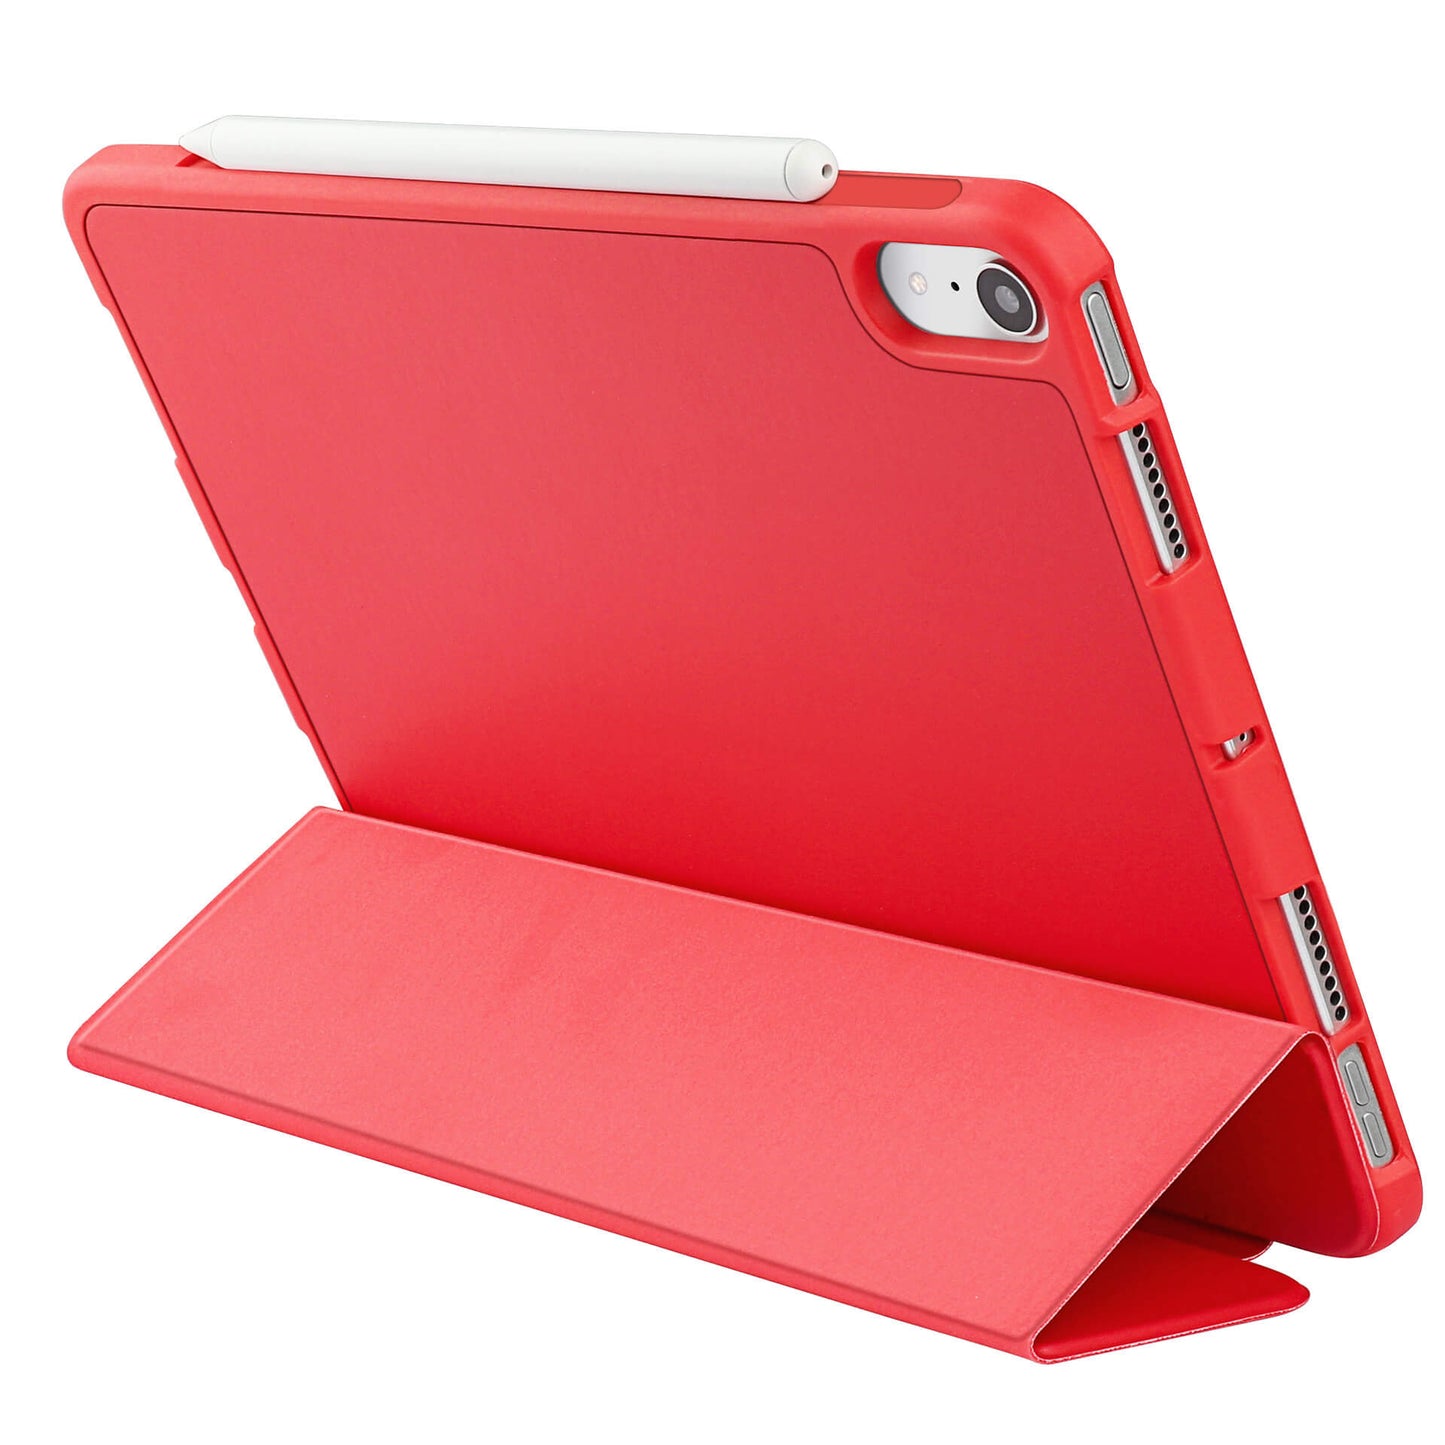 Solid Color PU iPad 9th/ 8th/ 7th Gen Case 10.2'' with Pencil Holder iPad Case